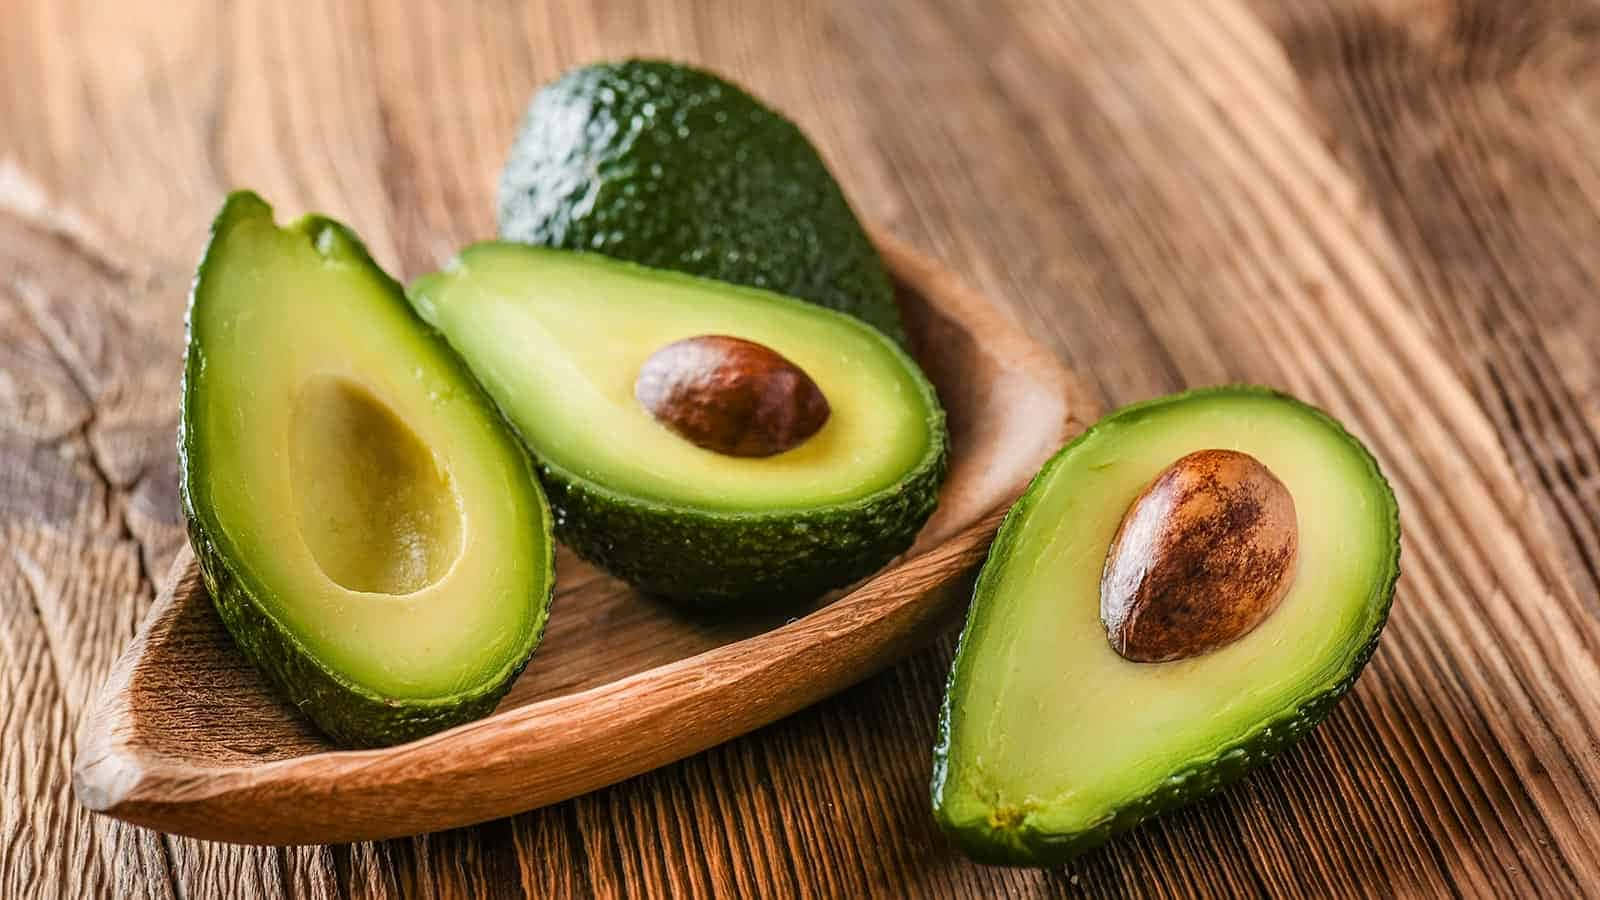 Avocados In A Wooden Bowl On A Wooden Table